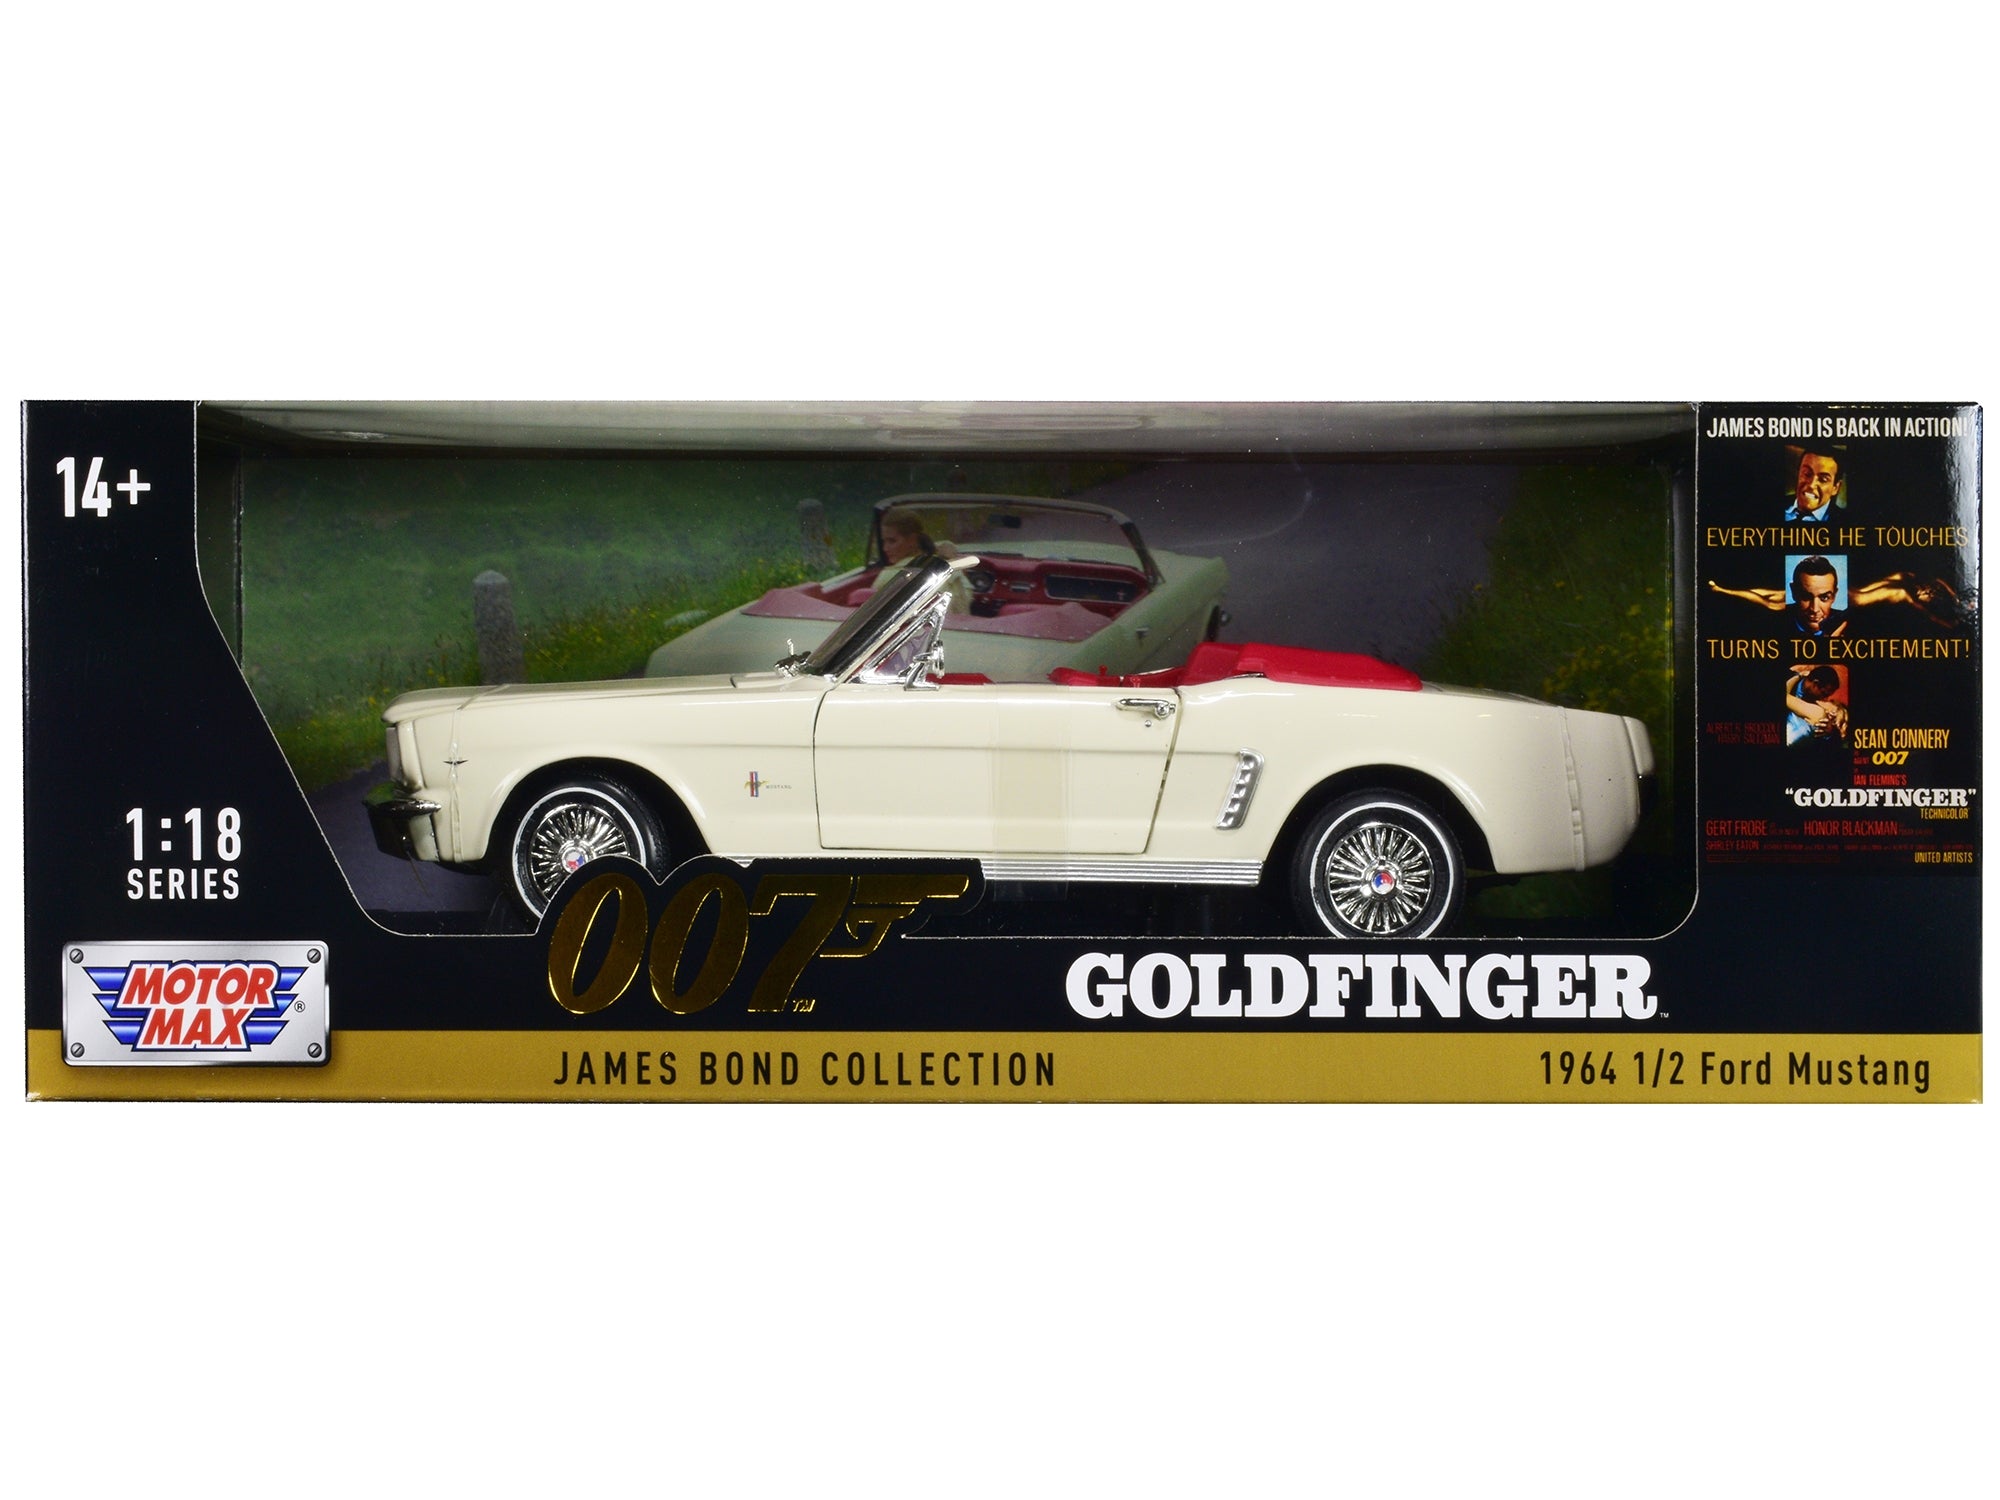 1964 1/2 Ford Mustang Convertible White with Red Interior James Bond 007 "Goldfinger" (1964) Movie "James Bond Collection" Series 1/18 Diecast Model Car by Motormax Motormax